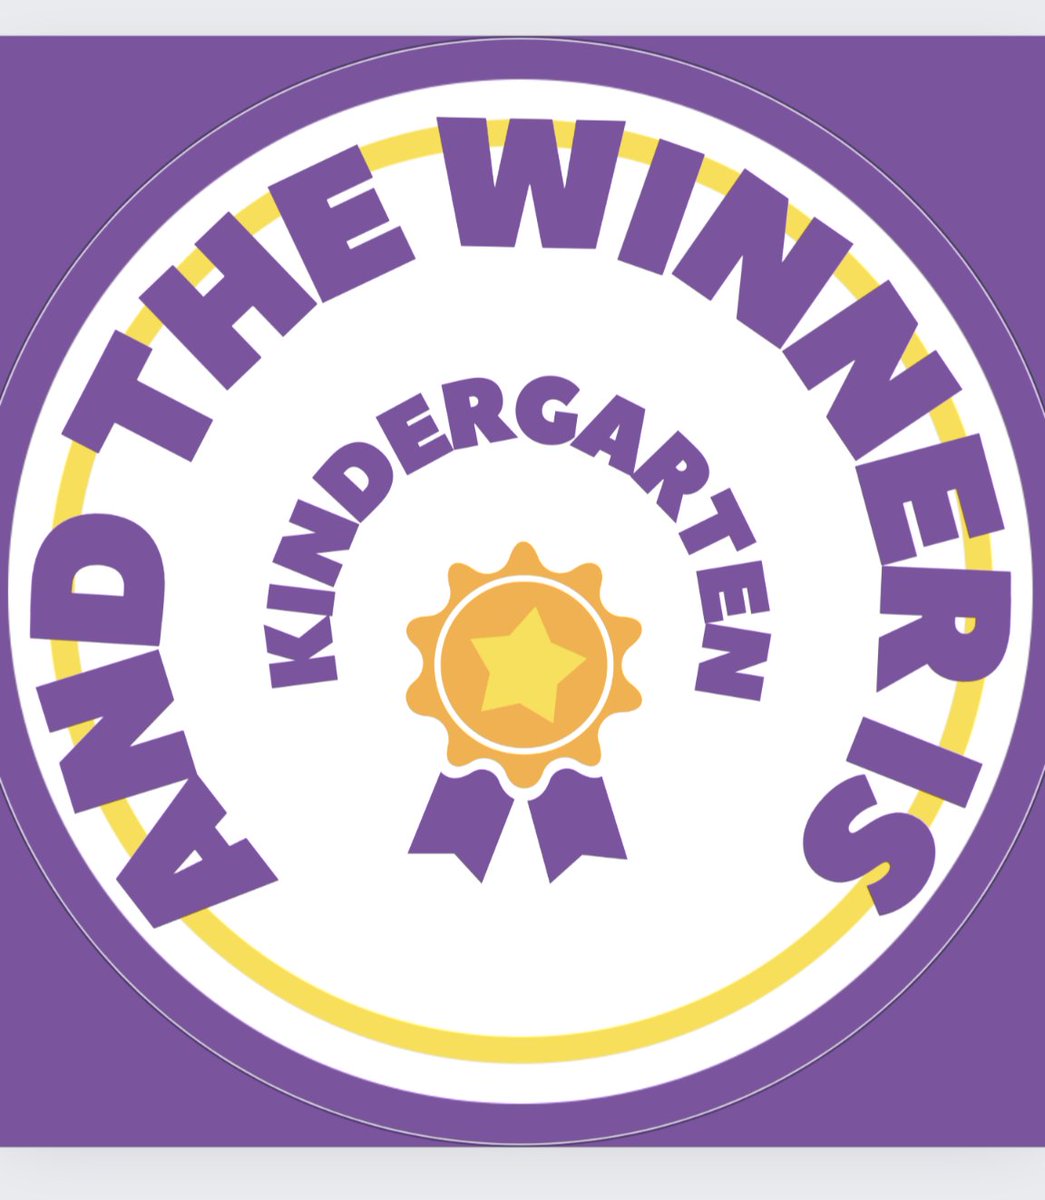 Winner of Penny Wars is.. Kindergarten! Thank you for your support to give back to the community Final scores: K: 3,037 1: 2,633 2: -790 3: -3,804 4: -3,780 5: -4,095 6: 2,342 #WeAreChandlerUnified #bolognascorpions #ScorpionPride #stingenergy #pennywars #StudentCouncil